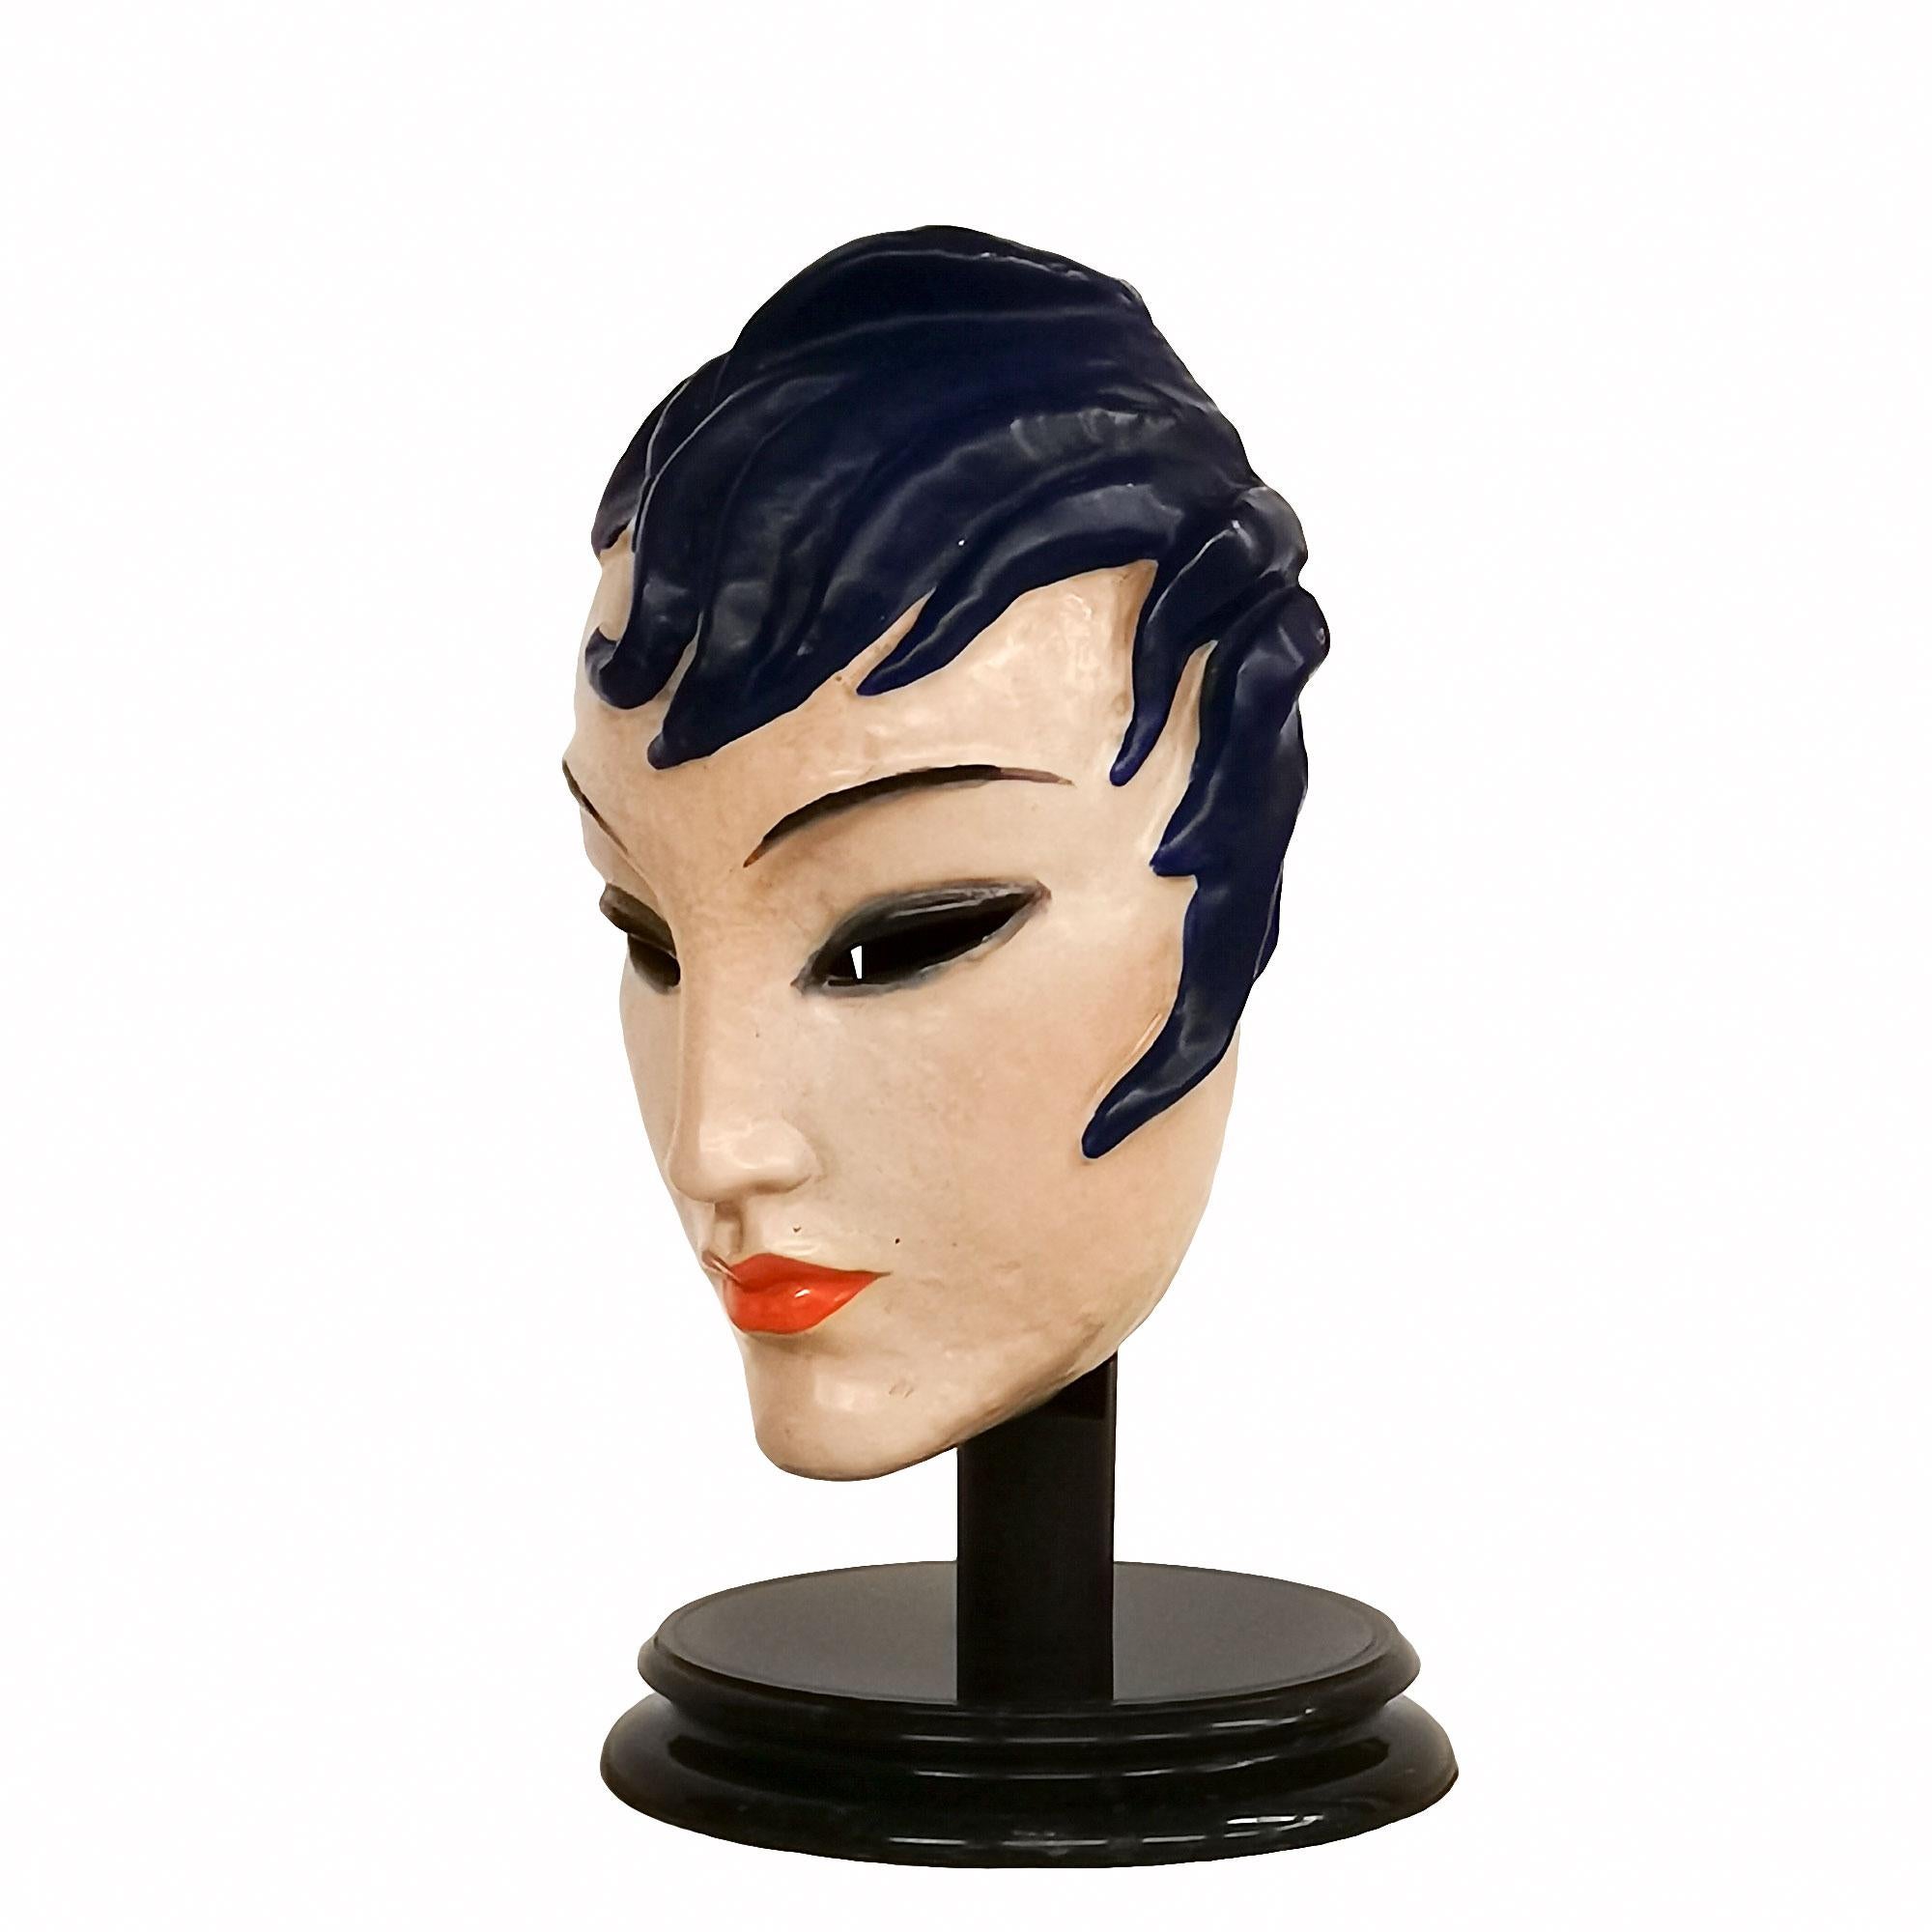 Art Deco woman face mask, enameled ceramic with a wood suppport and a marble base.
Production Keramos
Signed 